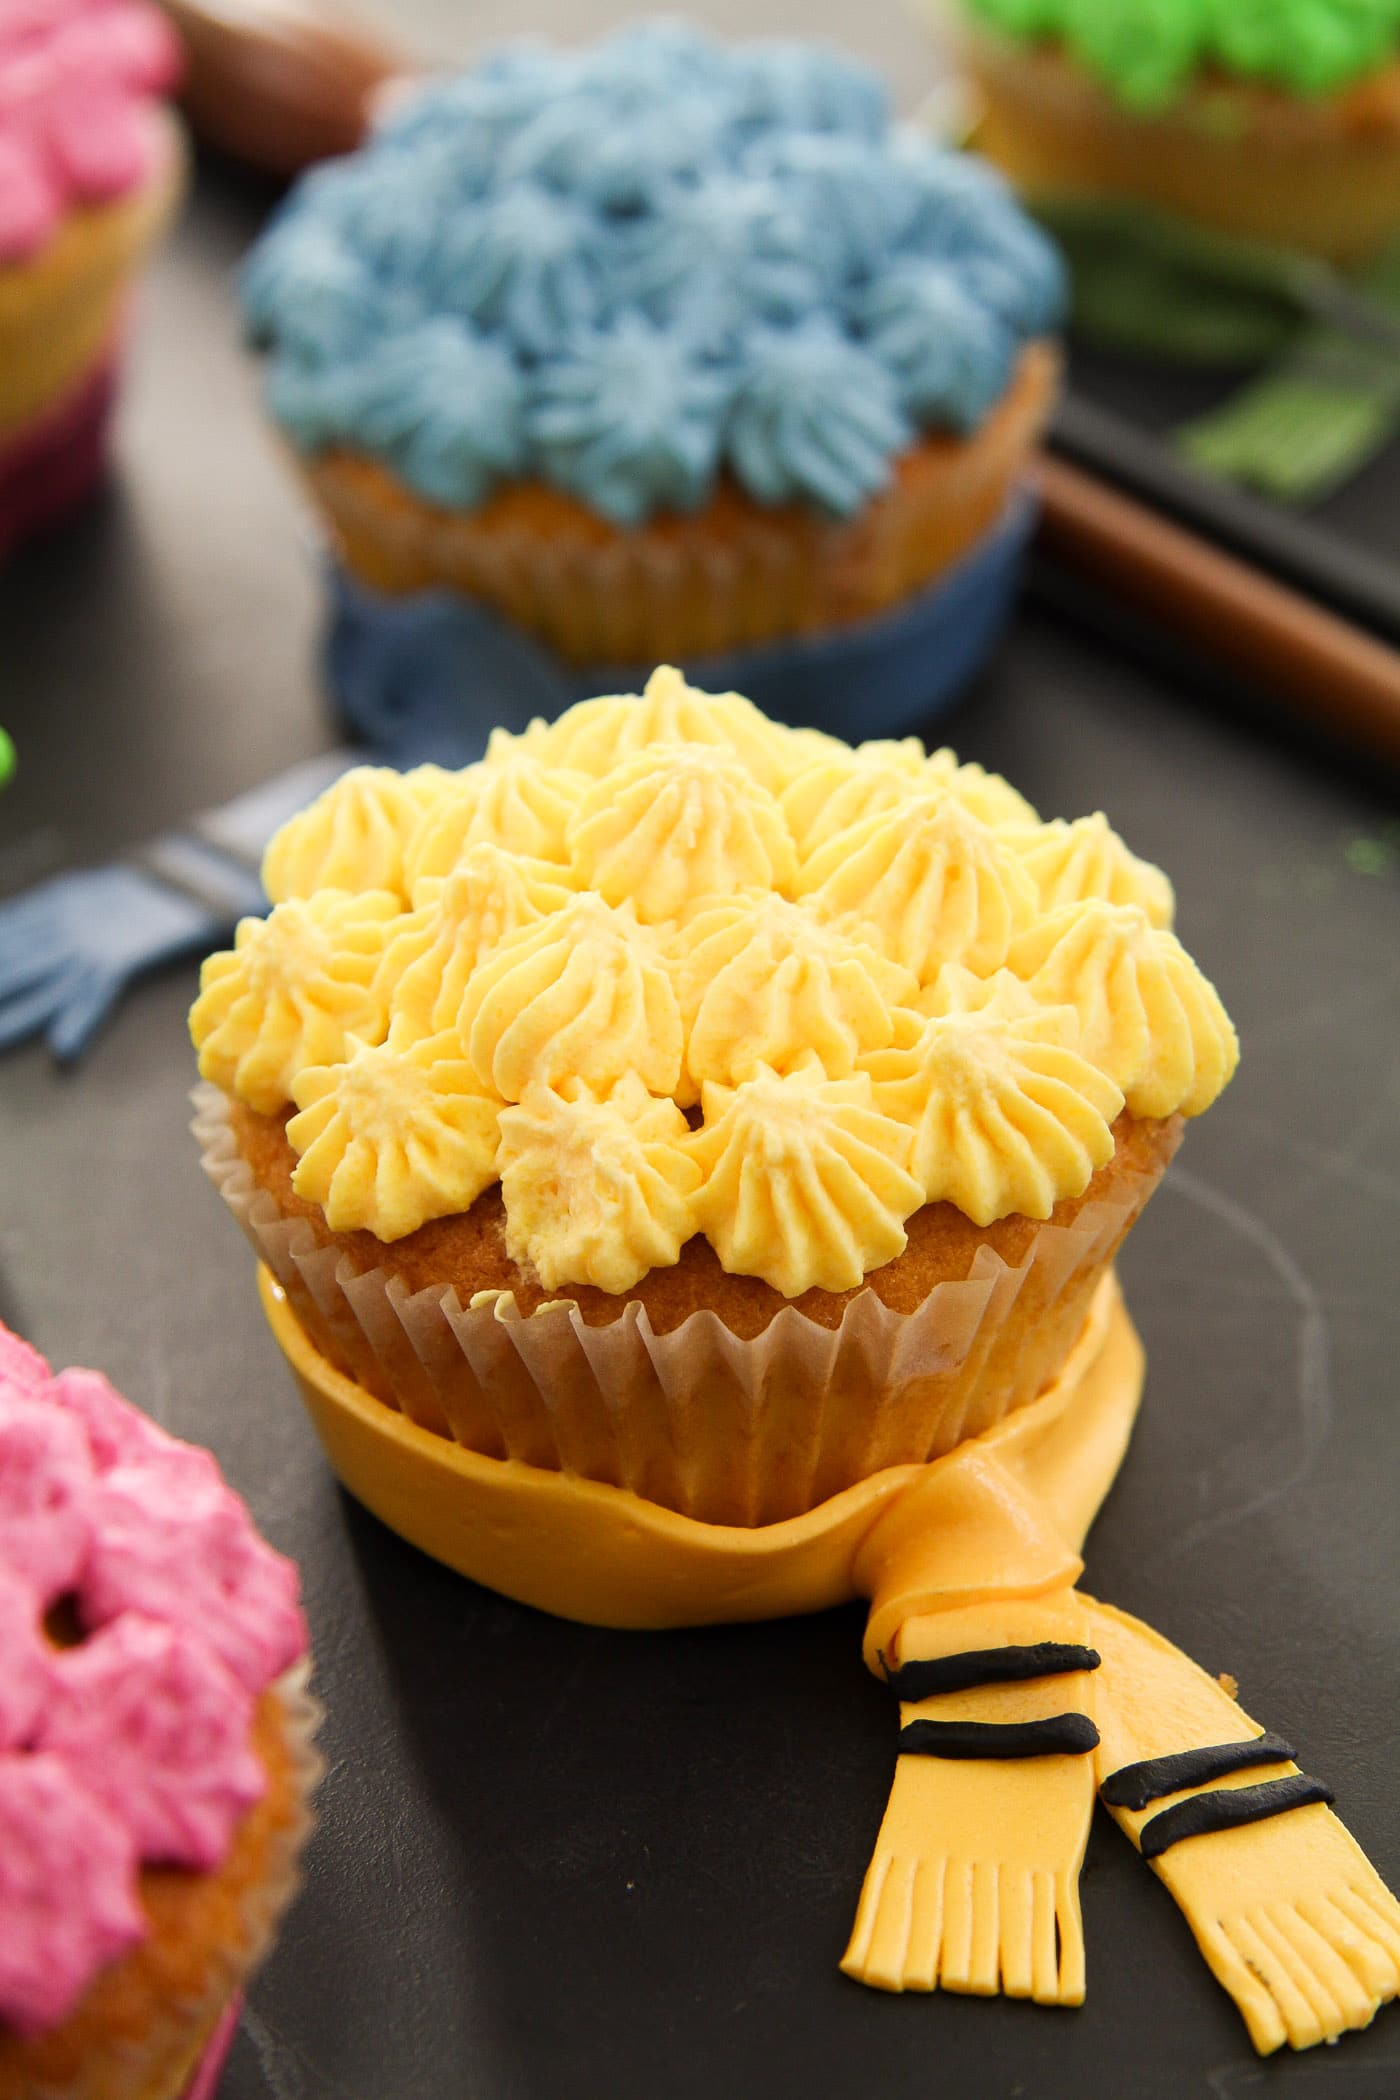 yellow hufflepuff cupcake decorated with whipped cream and a fondant scarf